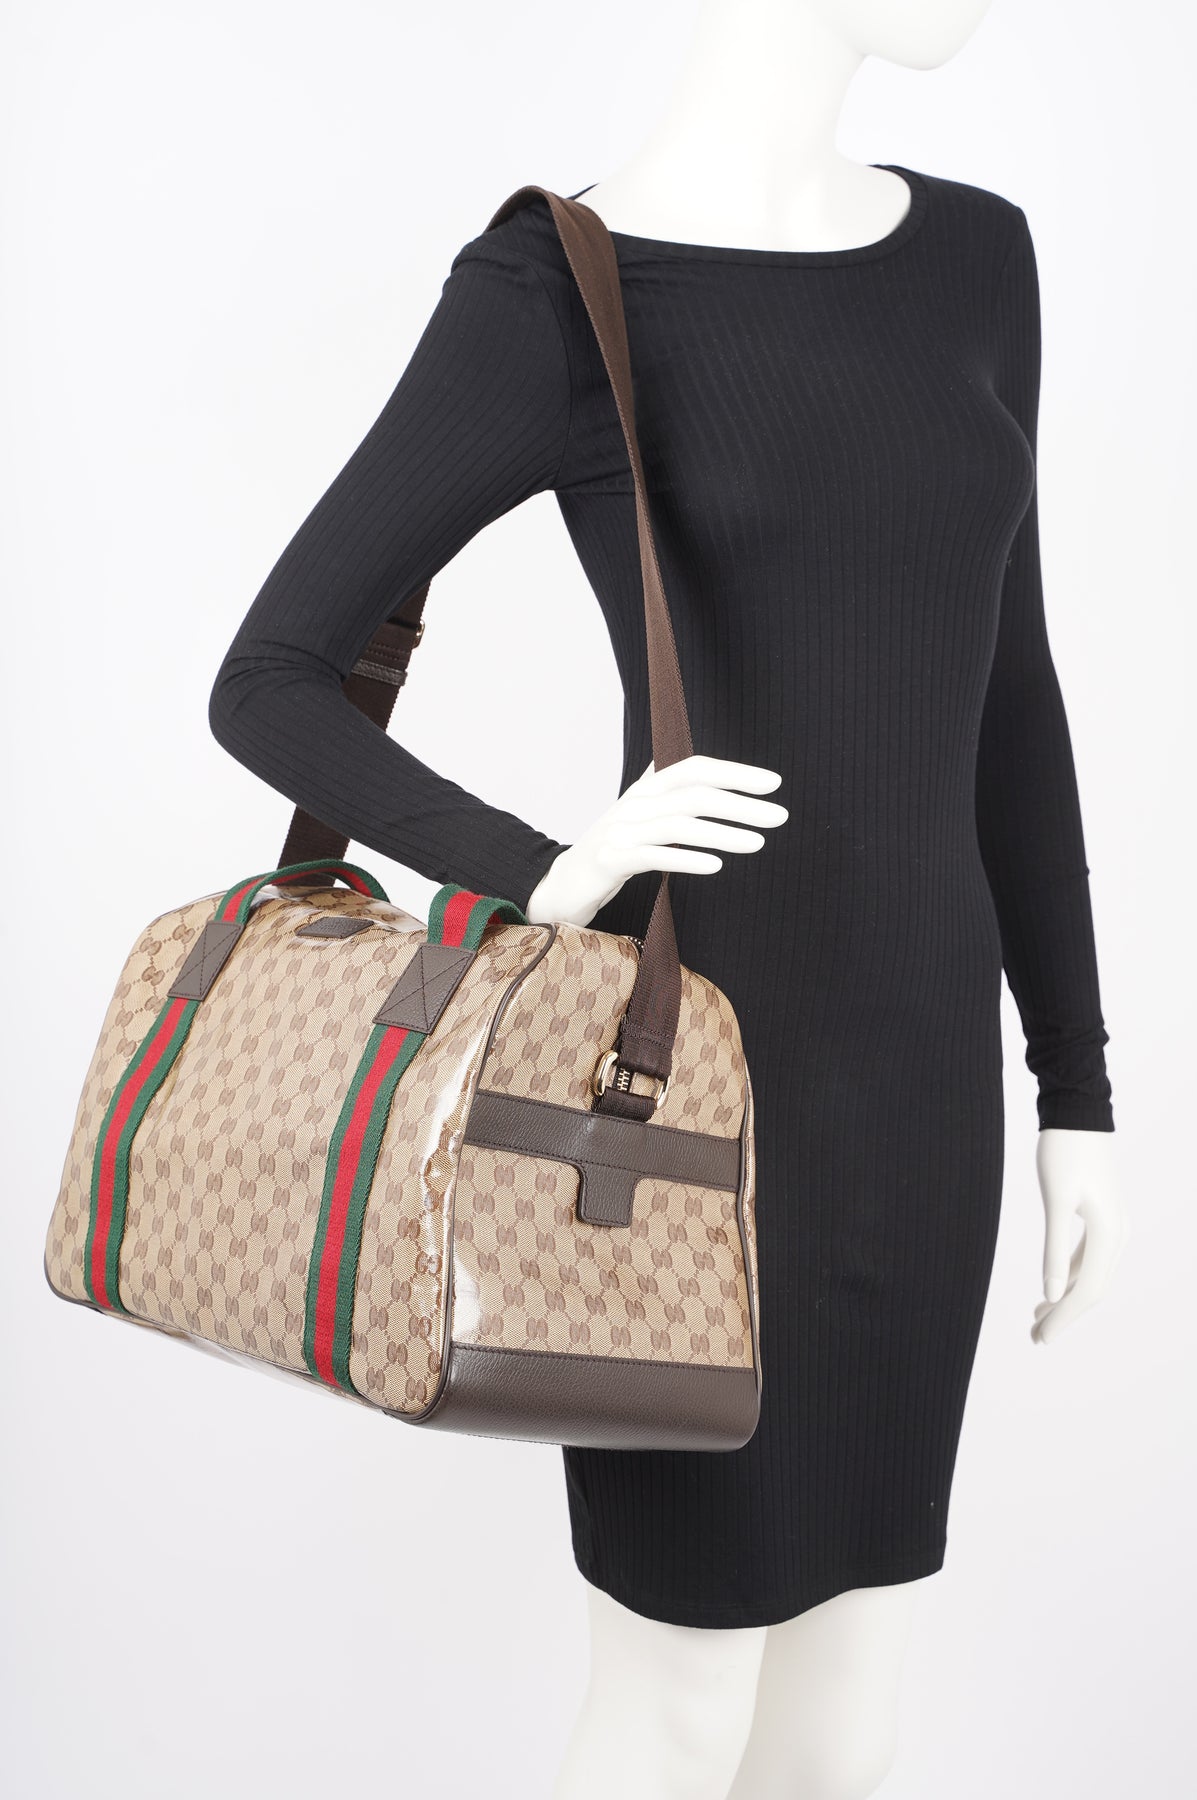 Gucci Black Pebbled Leather Boston Bag with Green Red Green Web